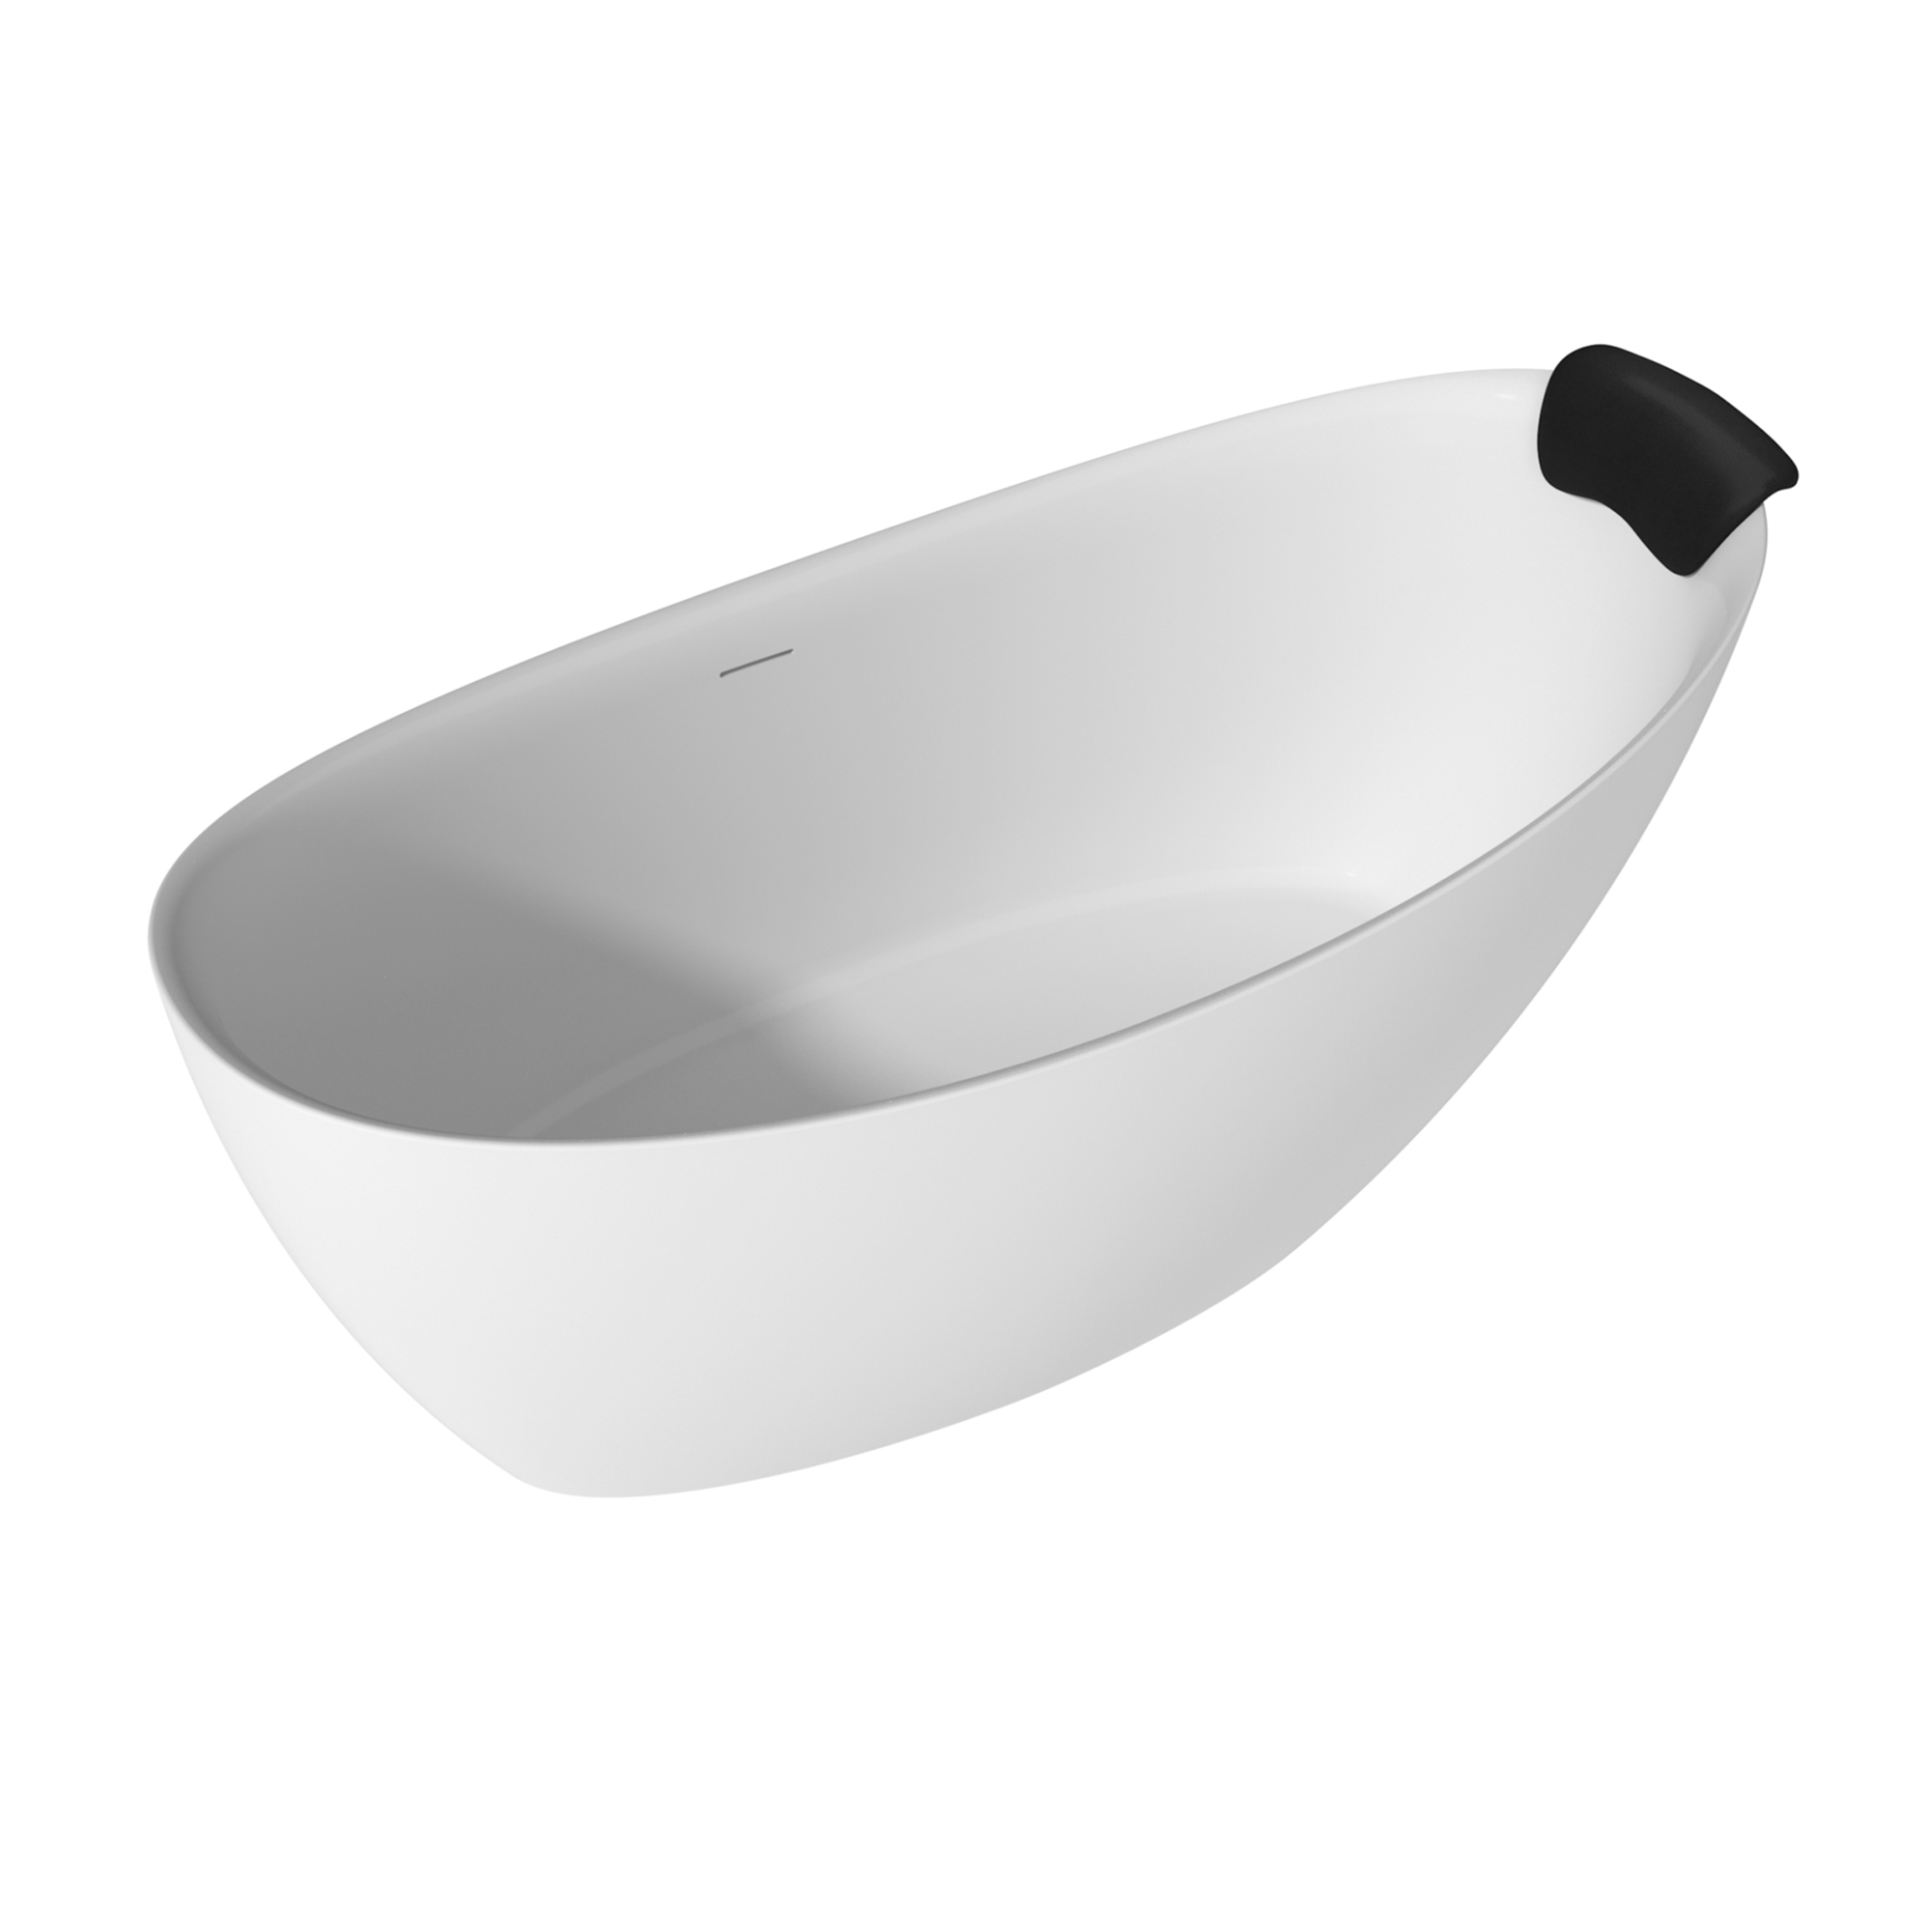 CASAINC 59/67" Matte White Stone Resin Bathtubs, Adult Freestanding Soaking Tub with Cushions, Manufactured with a Unique Solid Stone